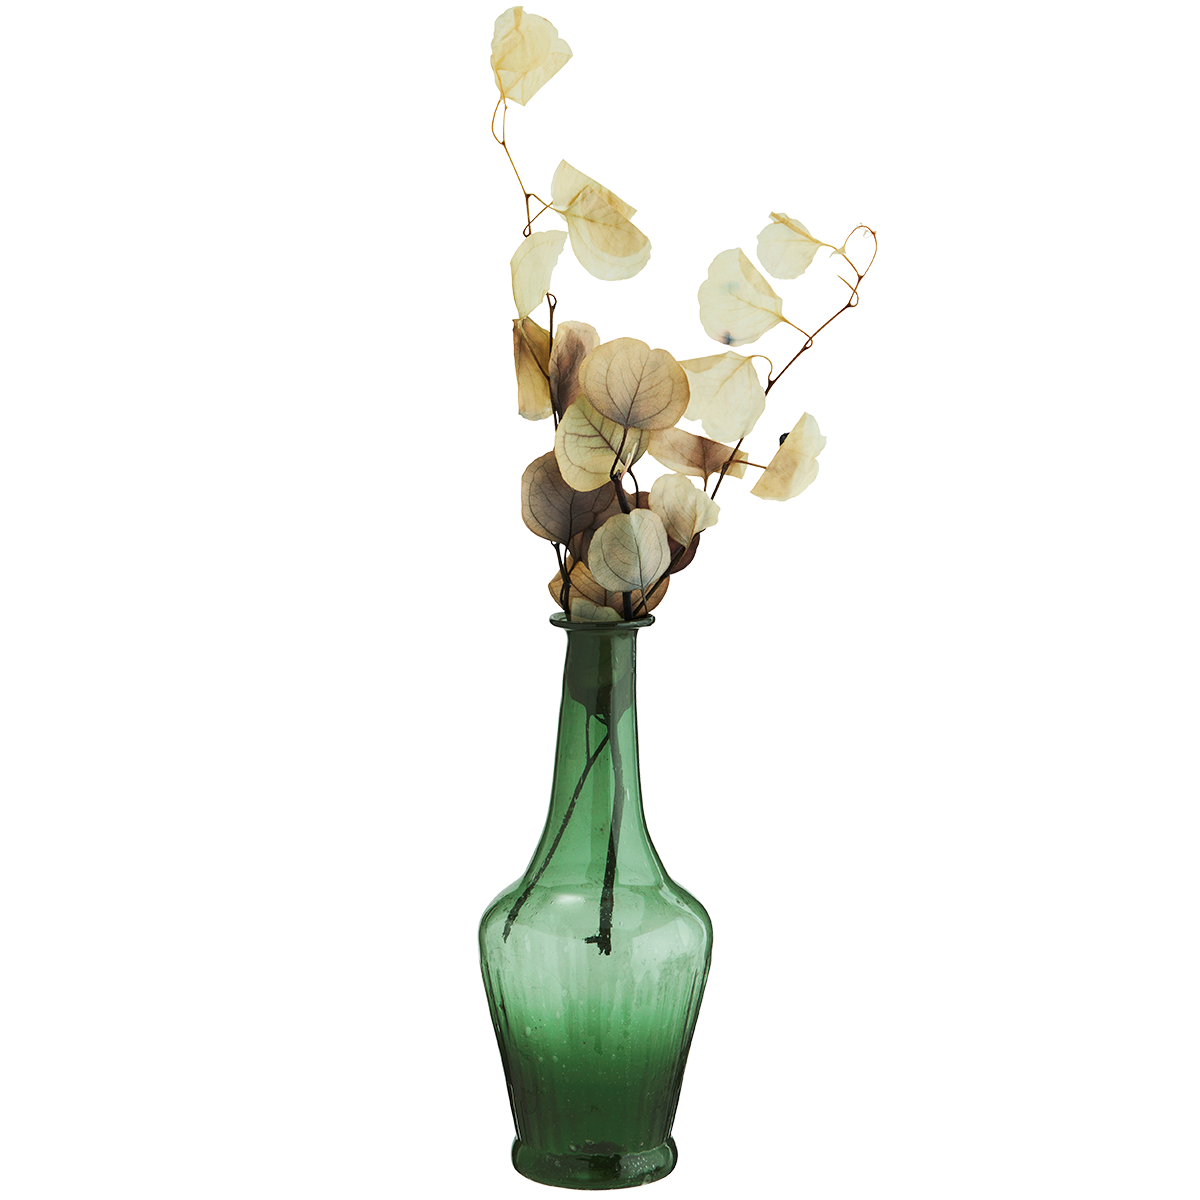 Recycled glass vase